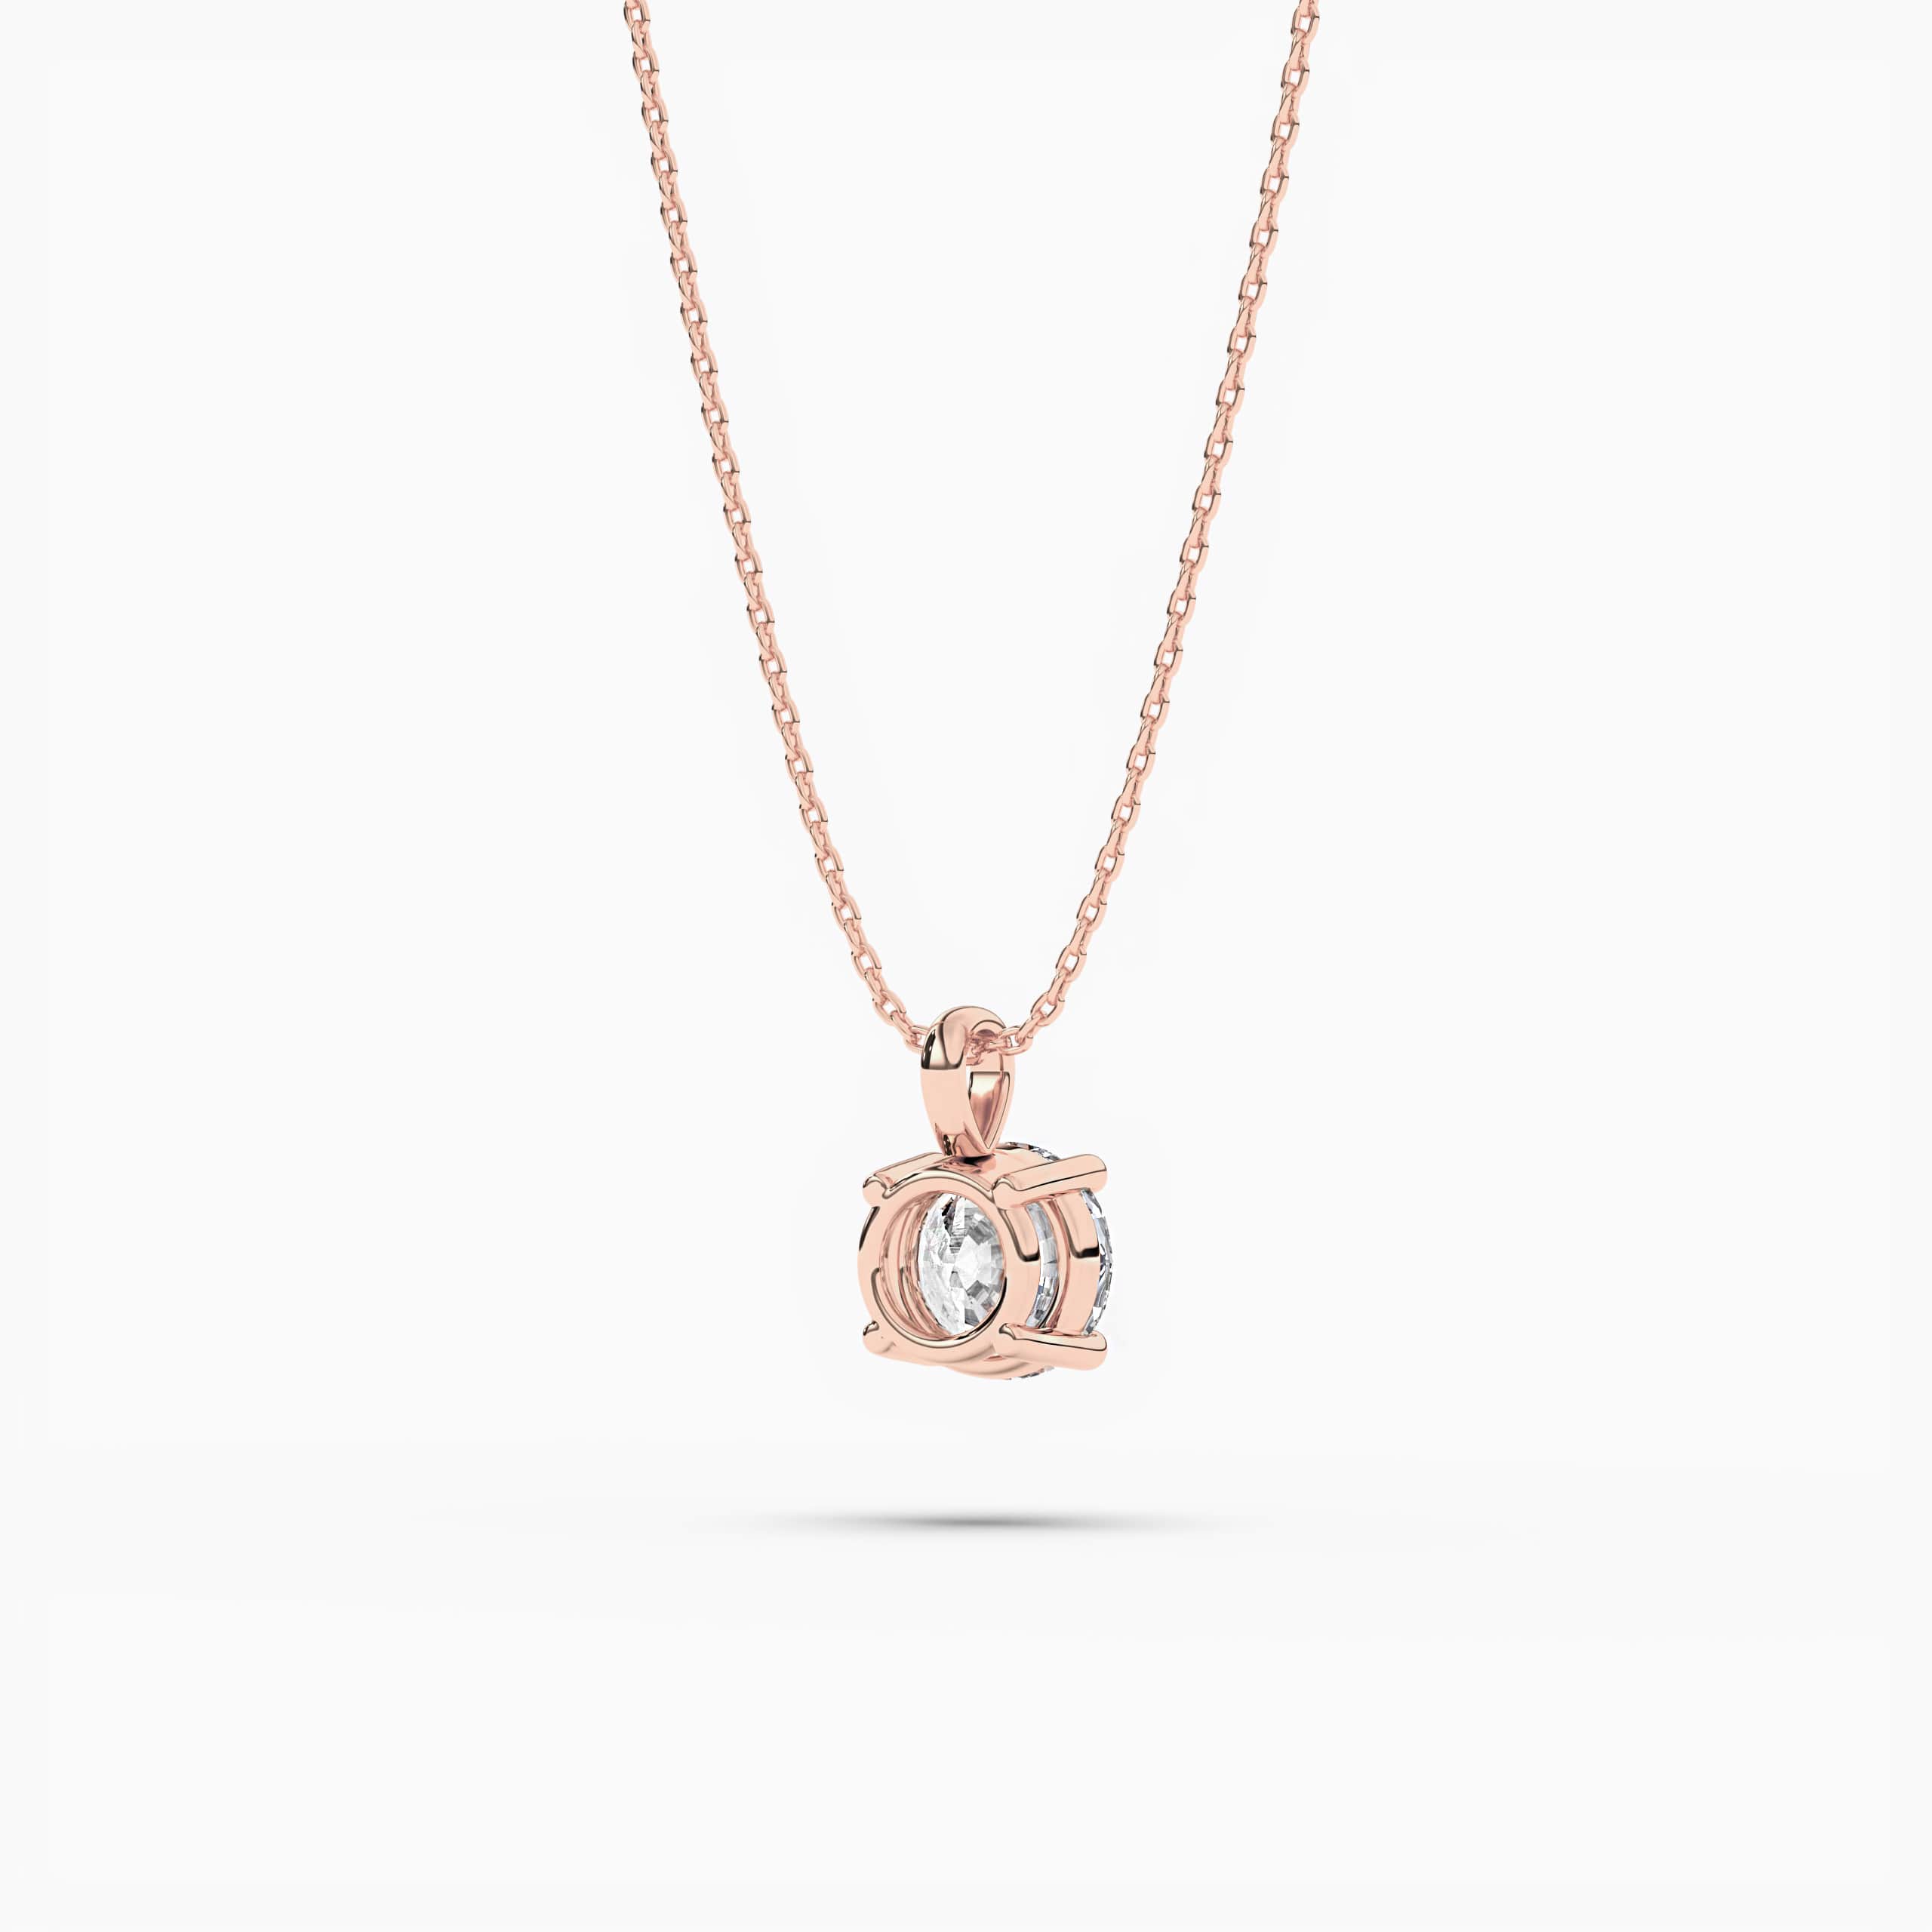 Round Cut Diamond Double Pendant Necklace in Rose Gold